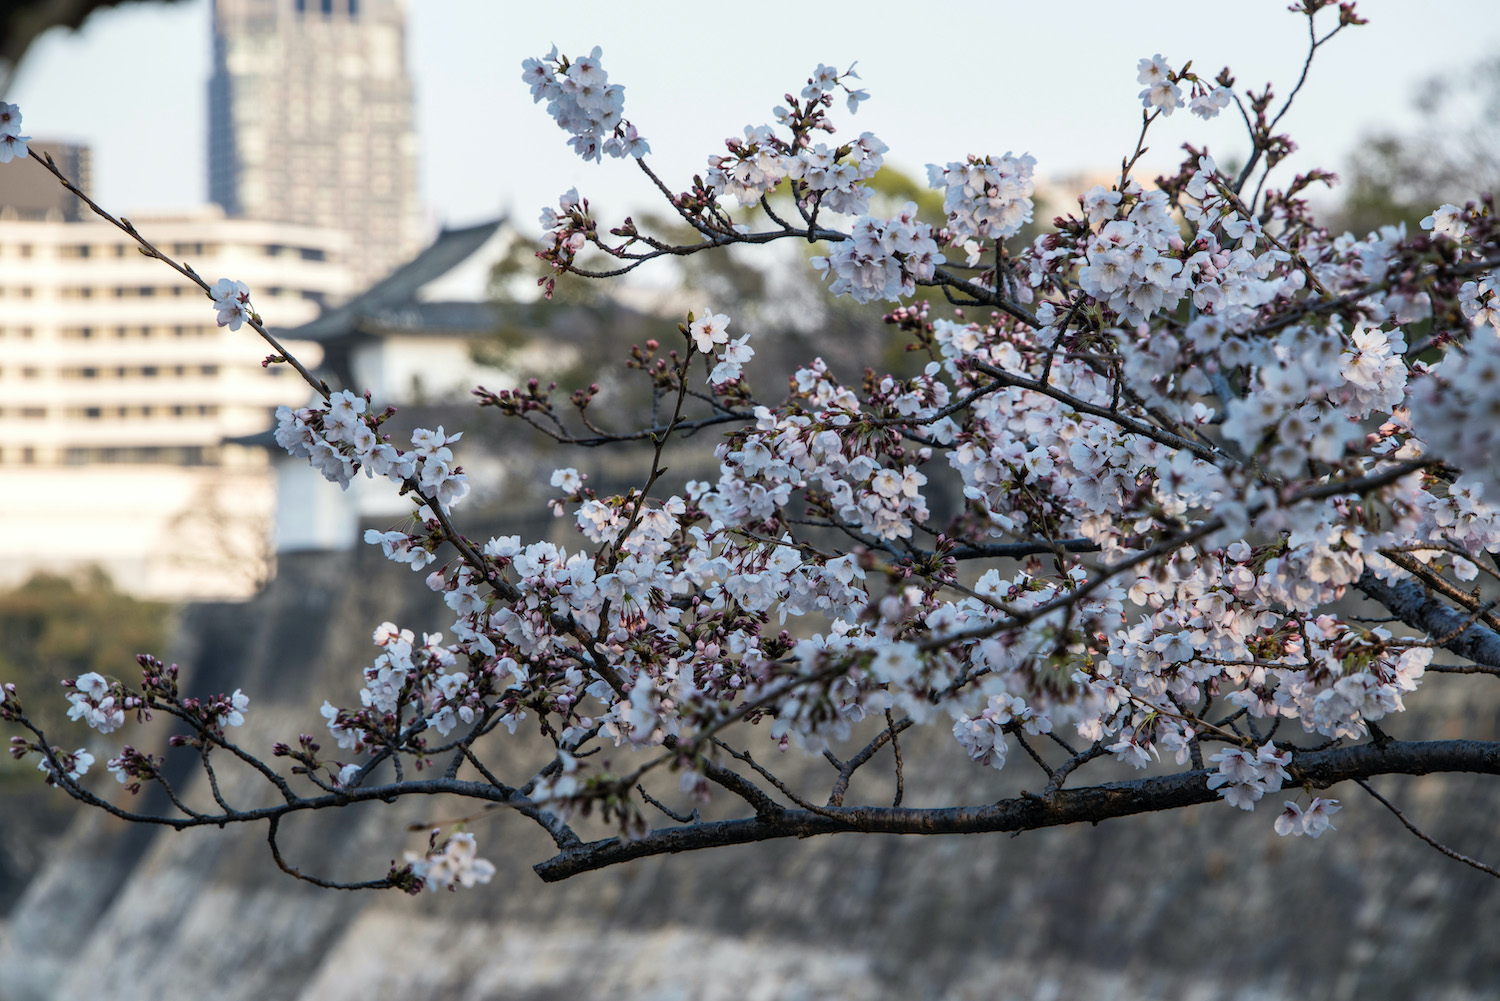 Where to See Osaka Cherry Blossoms in 2021 or 2022